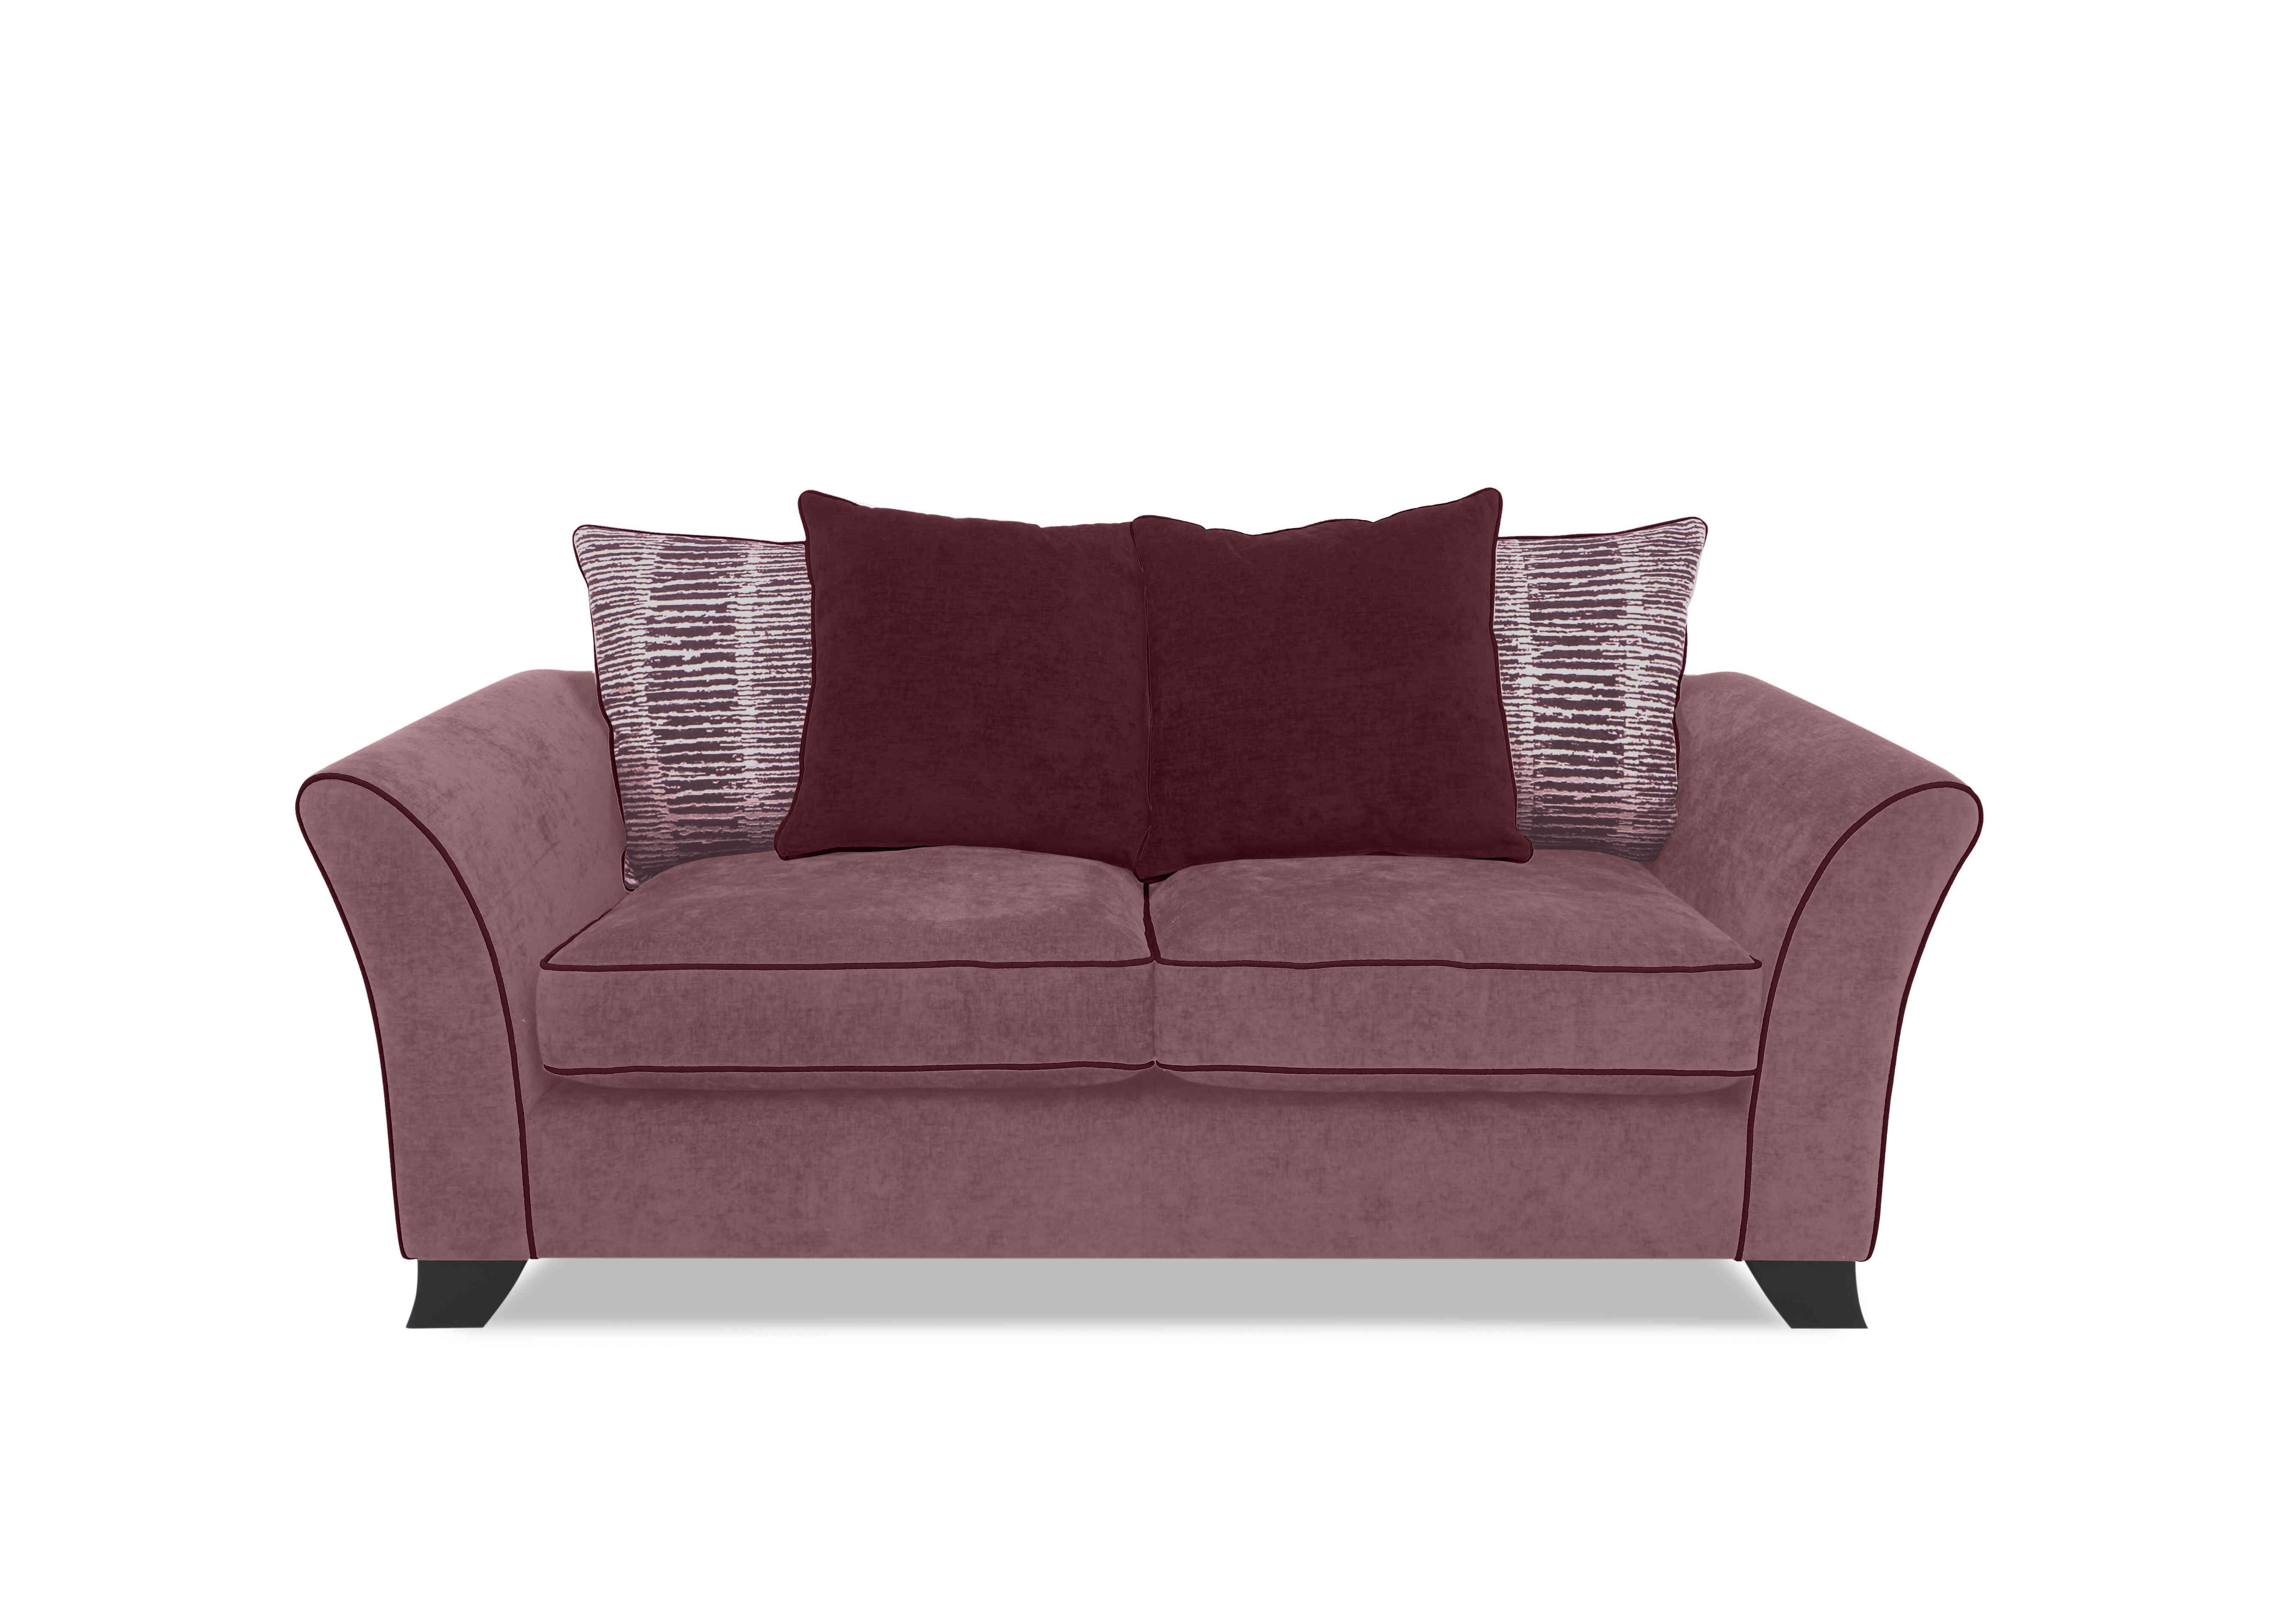 Stellar 3 Seater Scatter Back Sofa Bed in Bolero Mulberry Contrast on Furniture Village